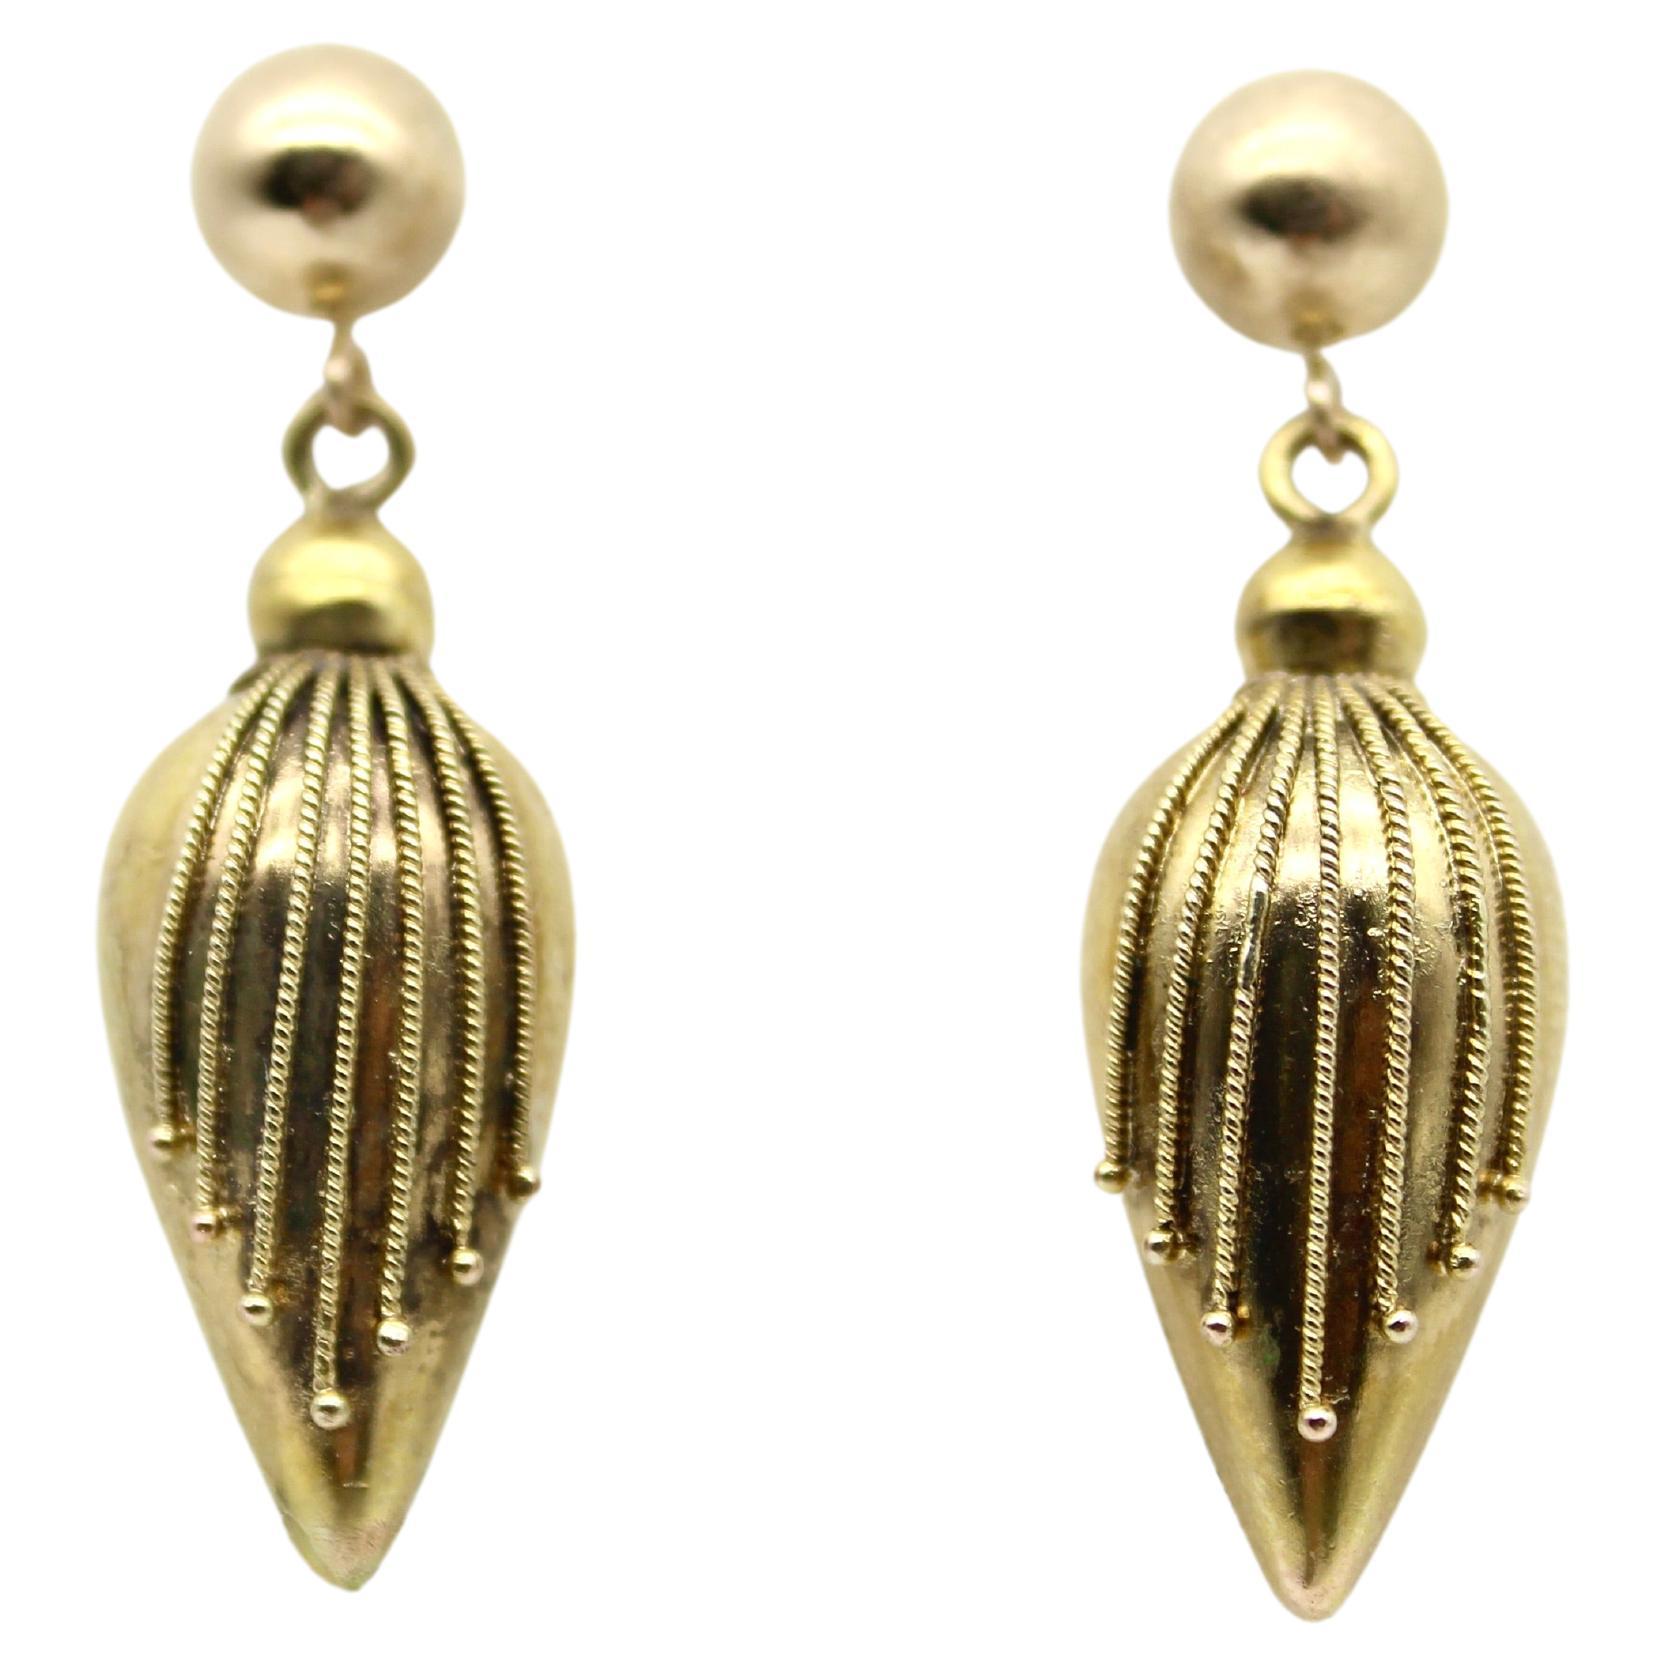 14k Gold Etruscan Revival Torpedo Earrings with Twisted Wirework